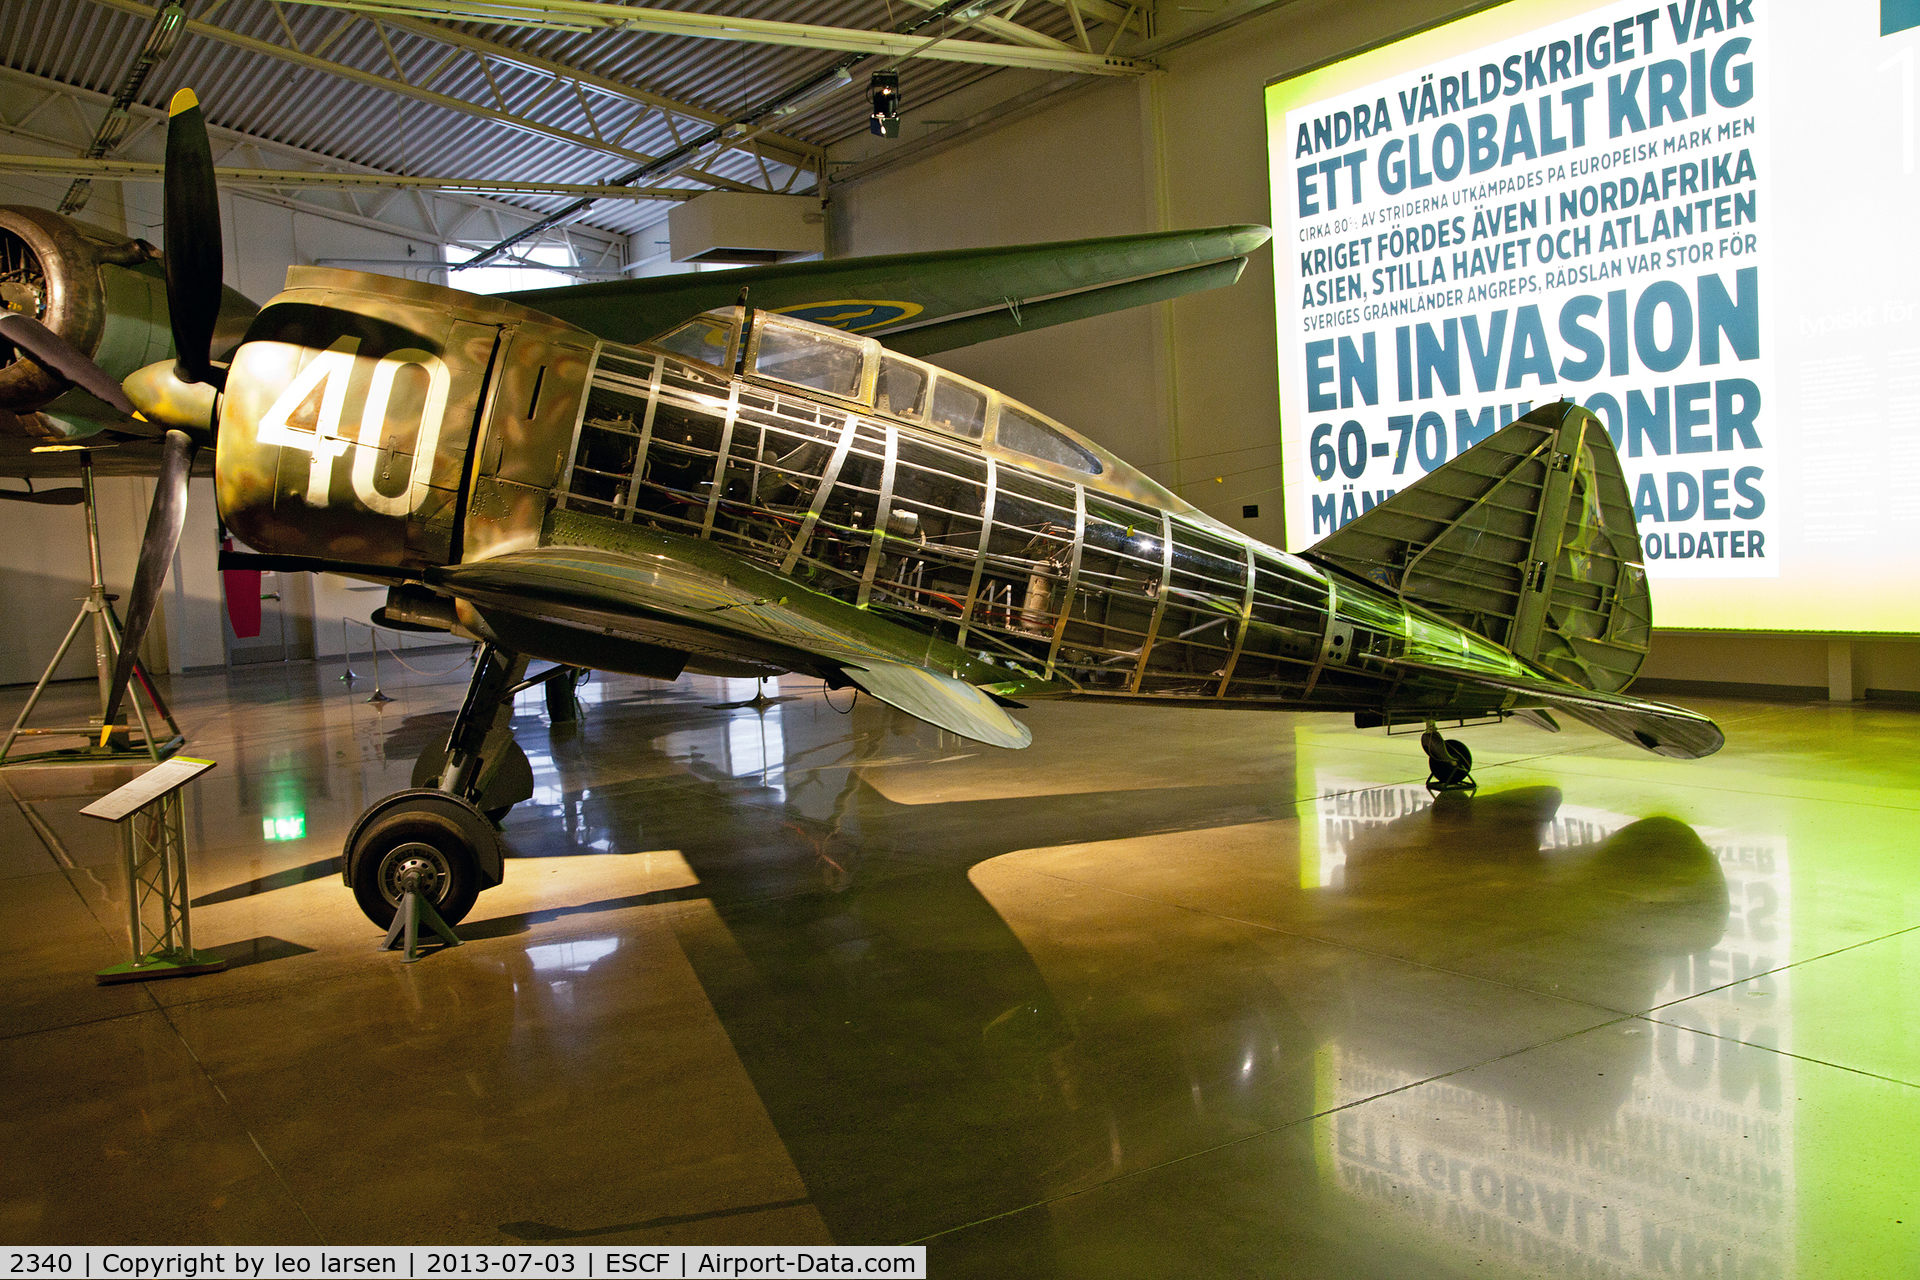 2340, 1940 Reggiane Re 2000 Falco 1 C/N not known, Flygvapen Museum Linkoping 3.7.13